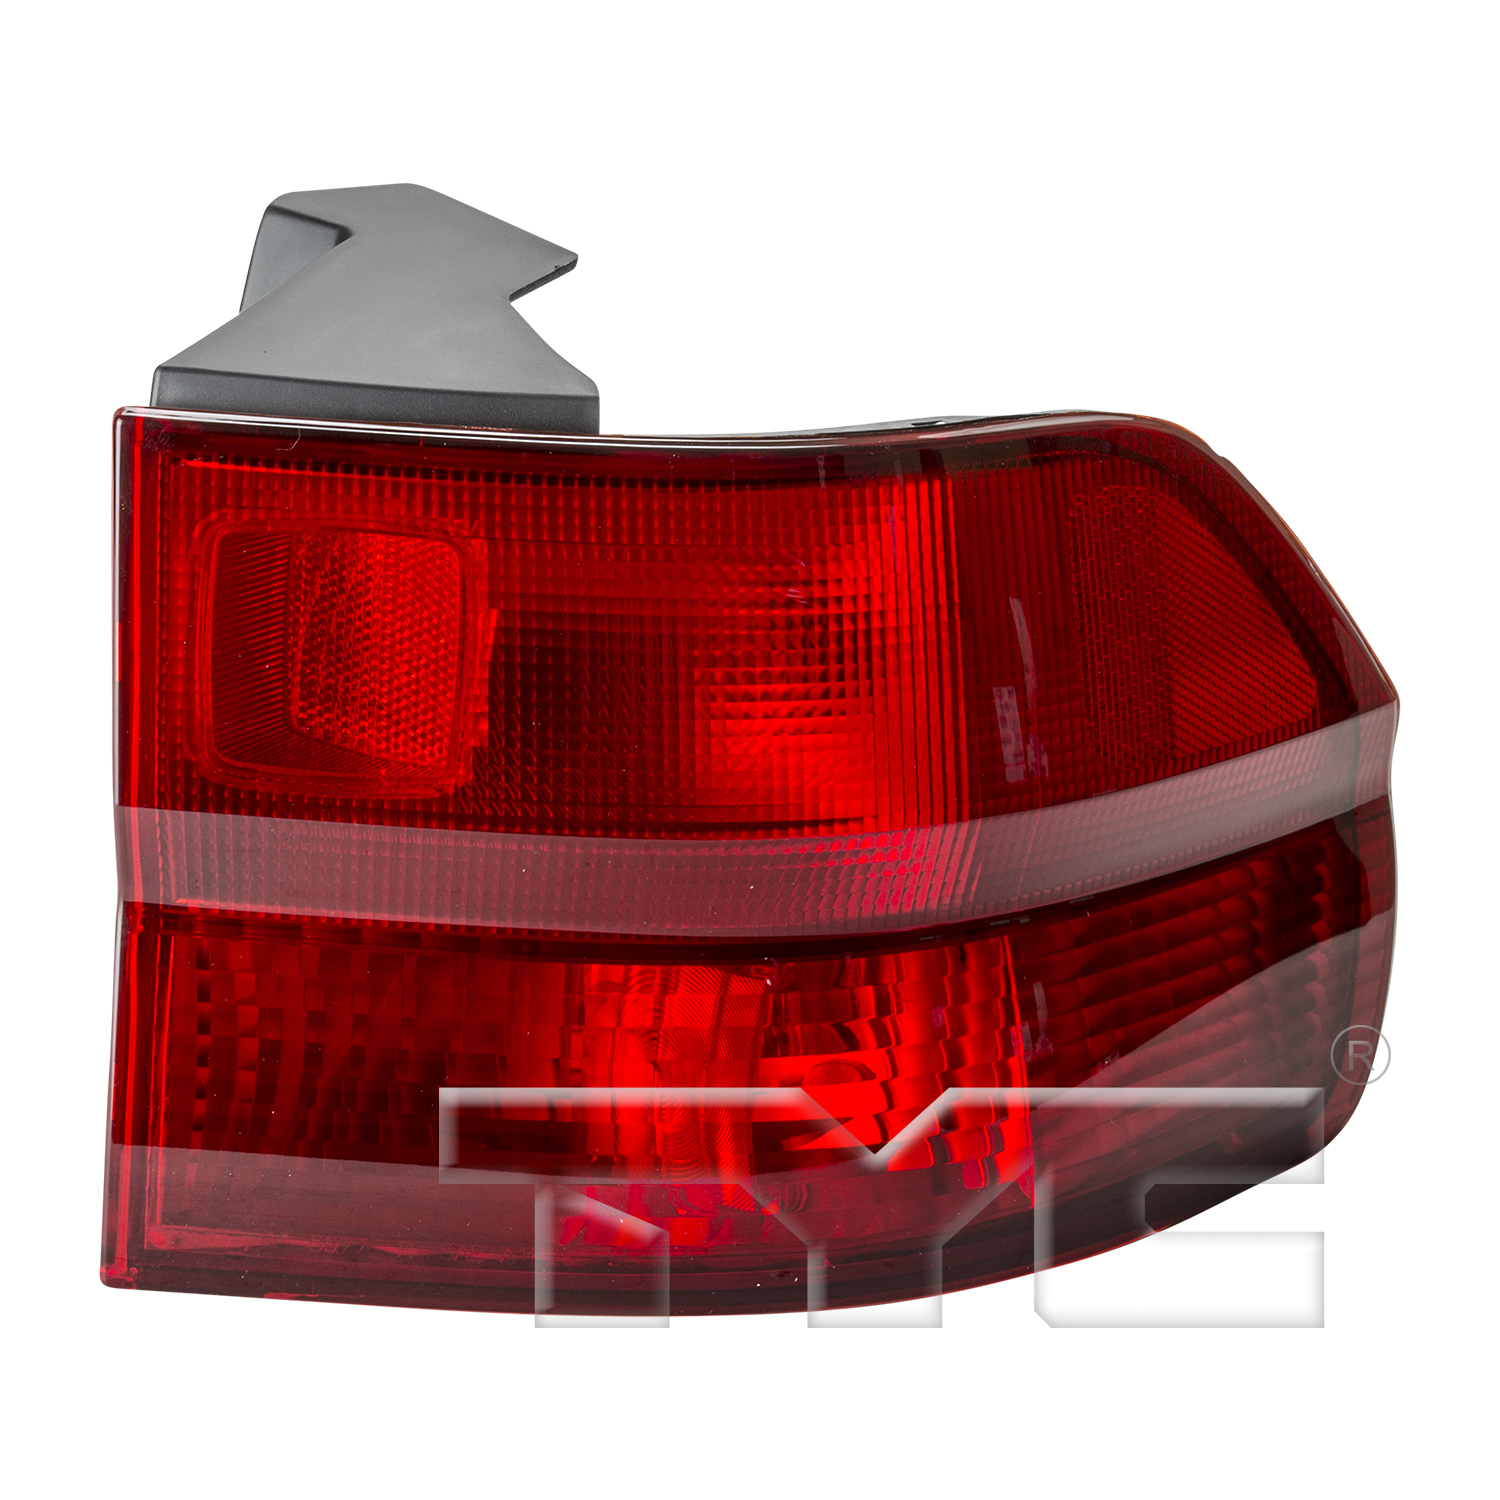 Aftermarket TAILLIGHTS for HONDA - ODYSSEY, ODYSSEY,99-01,RT Taillamp lens/housing